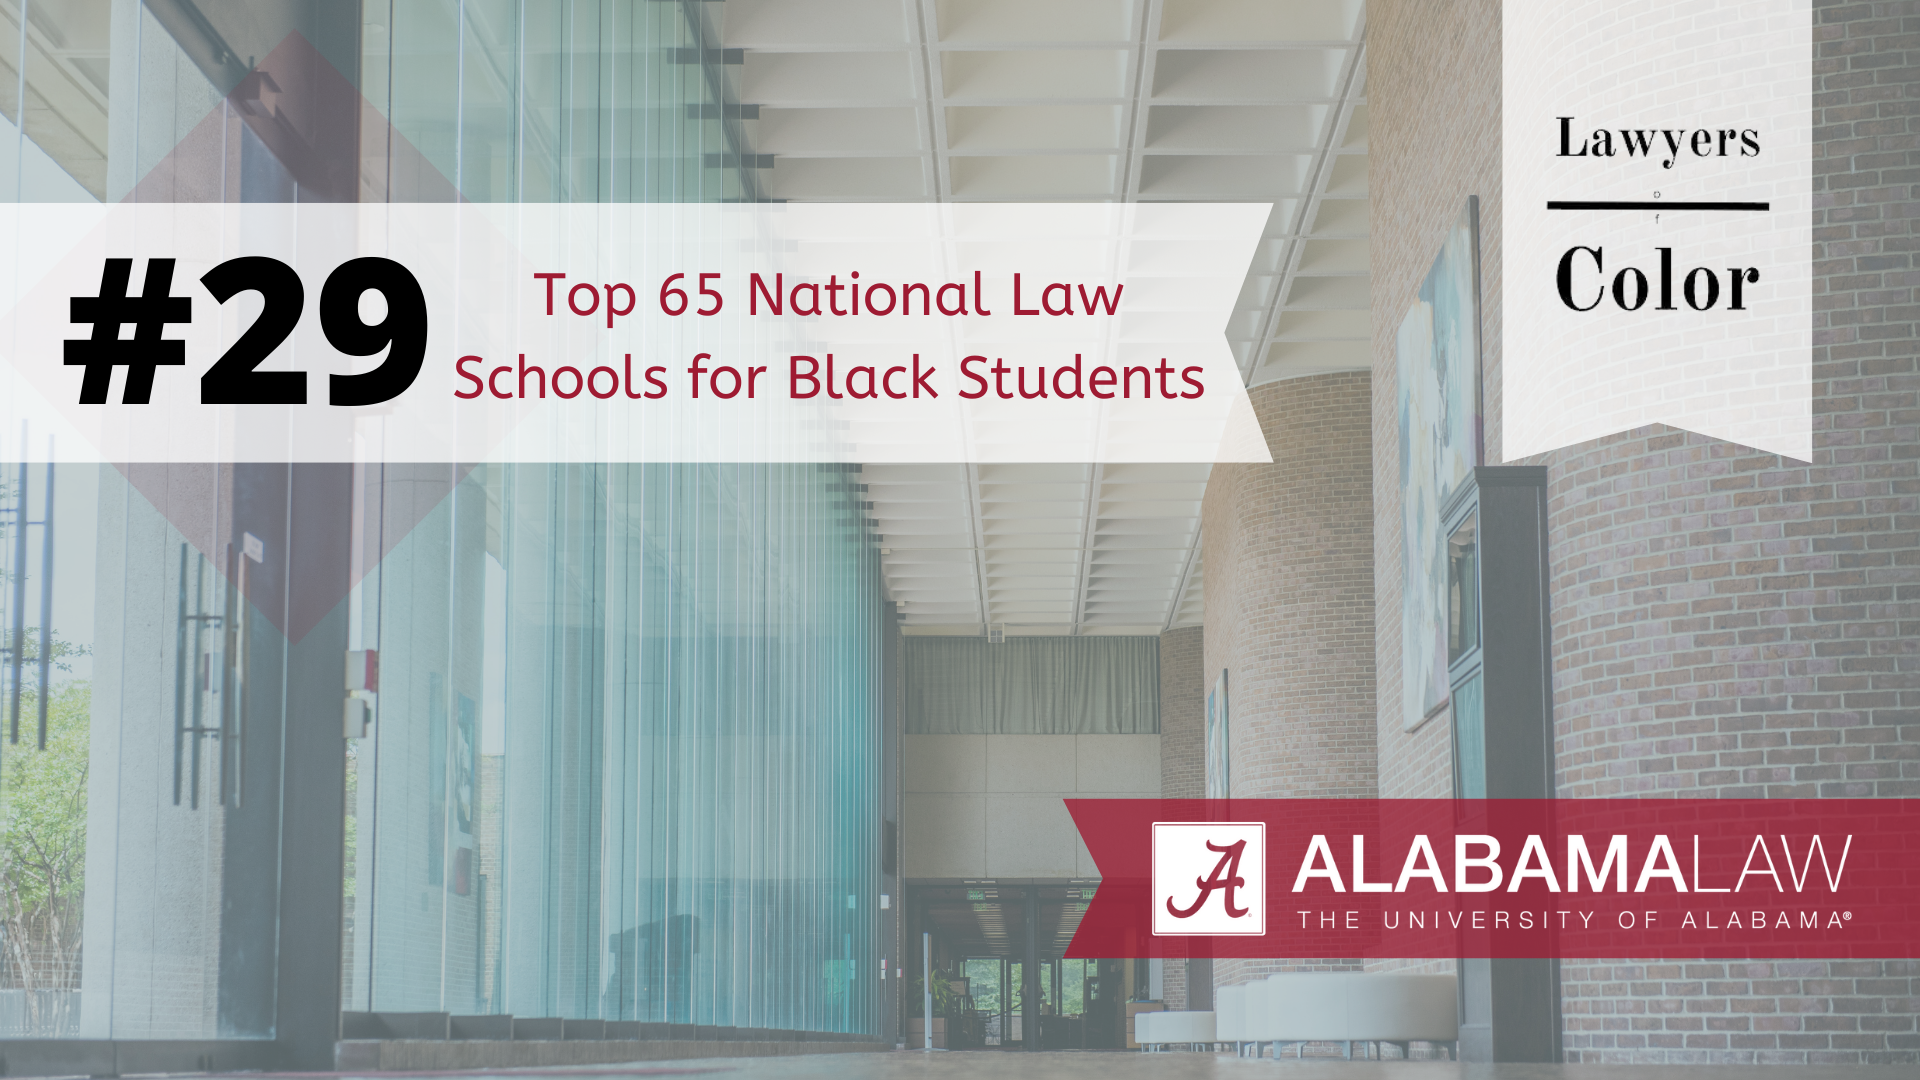 Alabama Law Ranks among the Top 30 National LAw Schools for Black Students